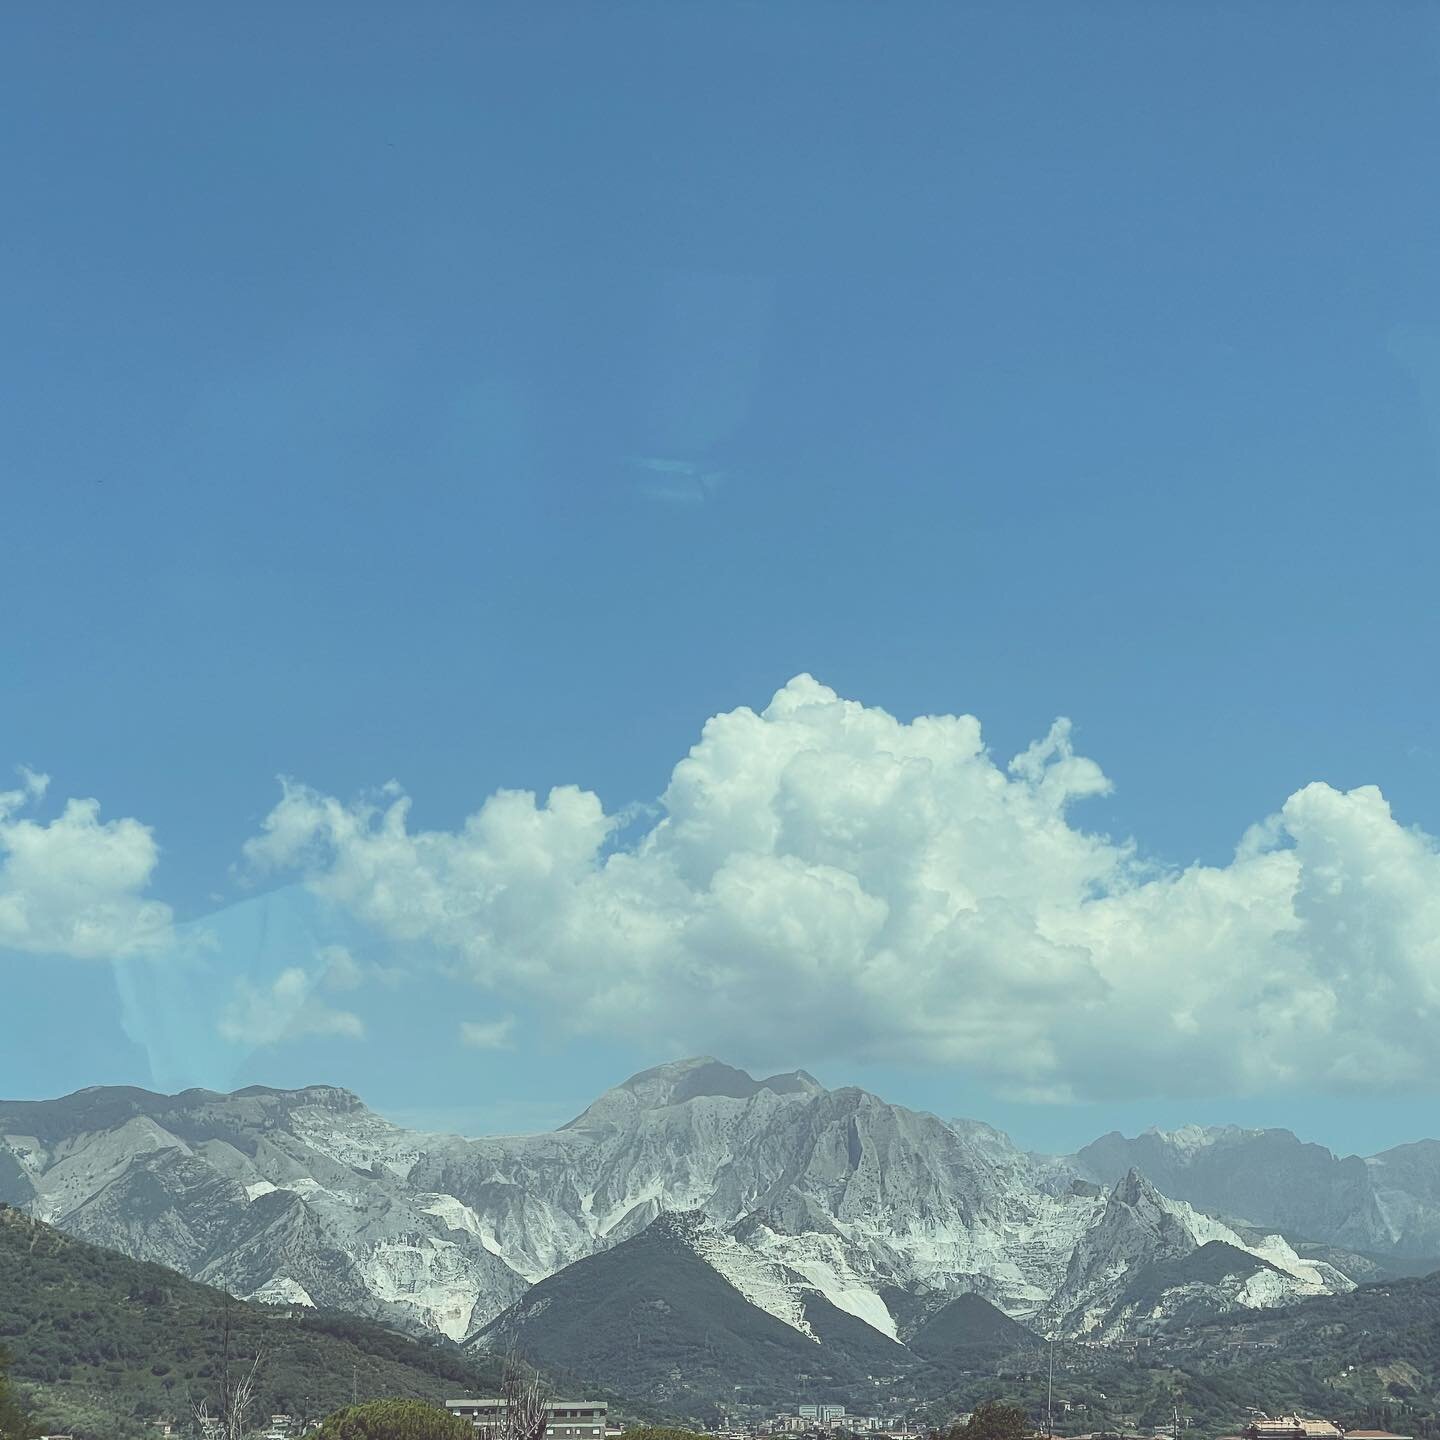 Snow? Not quite. These are the Apuan Alps- otherwise known as the mountains of Carrara. More marble has been produced from these mountain ranges than anywhere else in the world. 

.
.
.
.
.
.
#italy #travelgram #travelitaly #travel #design #interiors